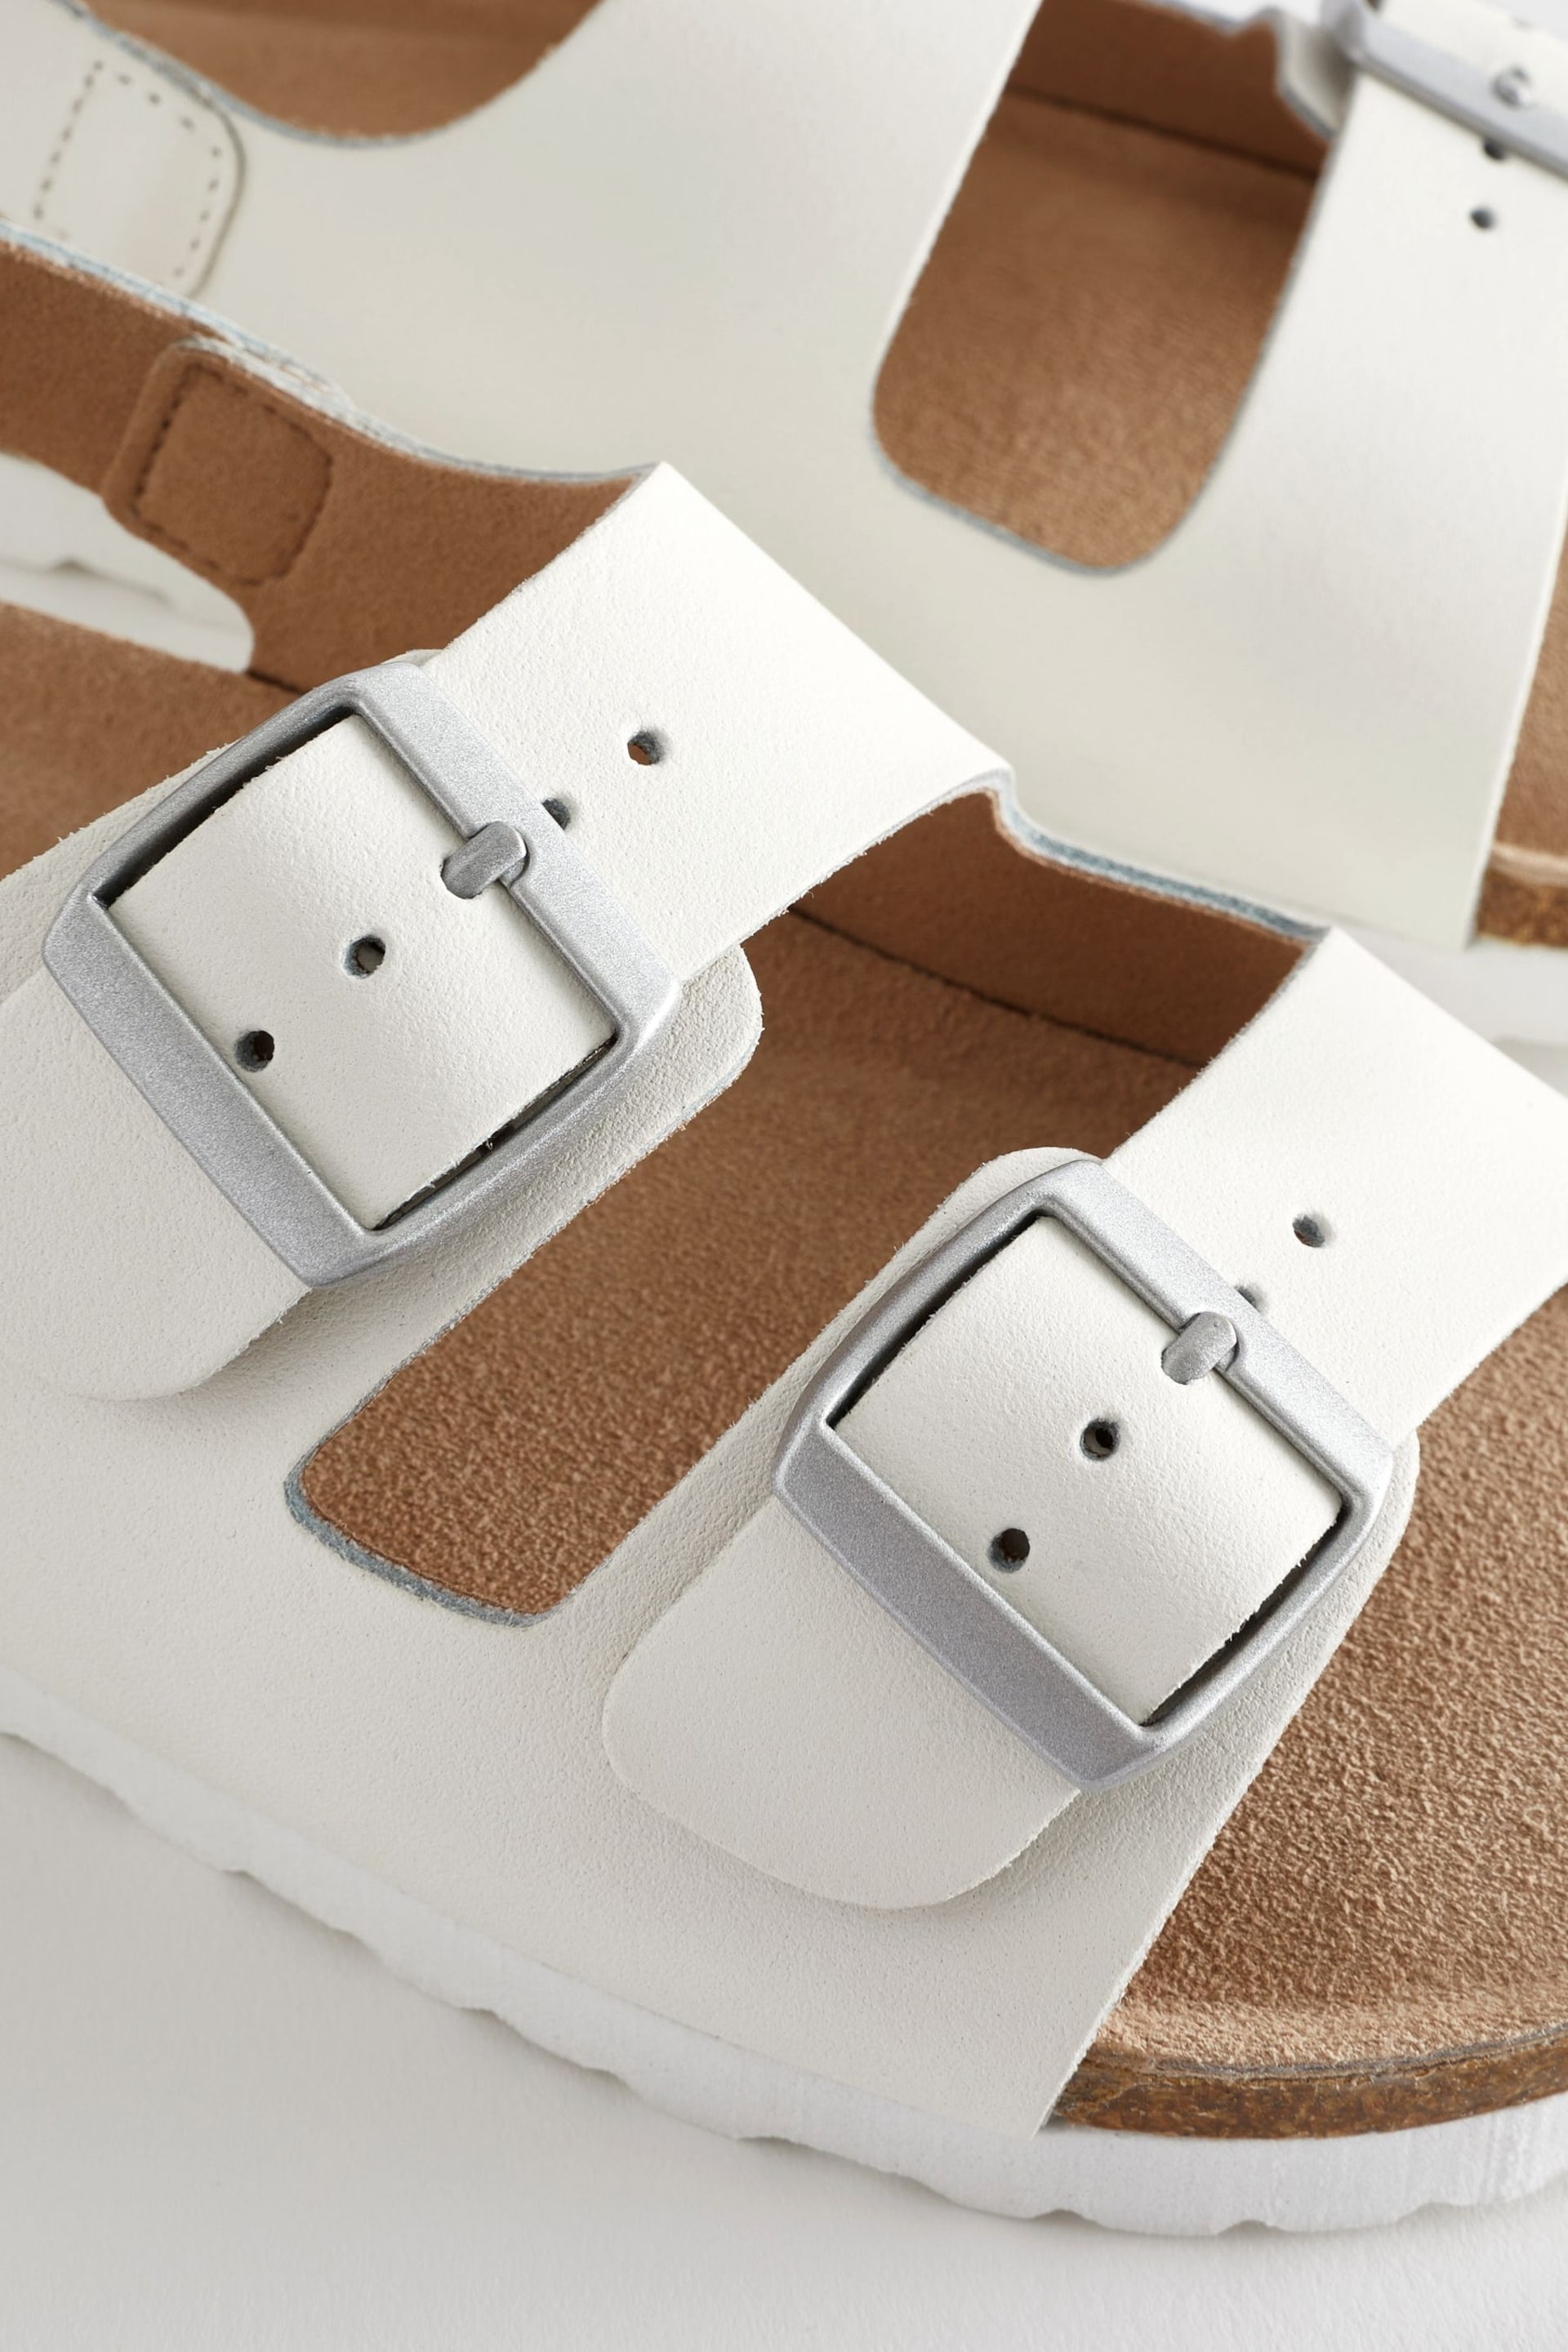 White Leather Standard Fit (F) Two Strap Corkbed Sandals - Image 8 of 9